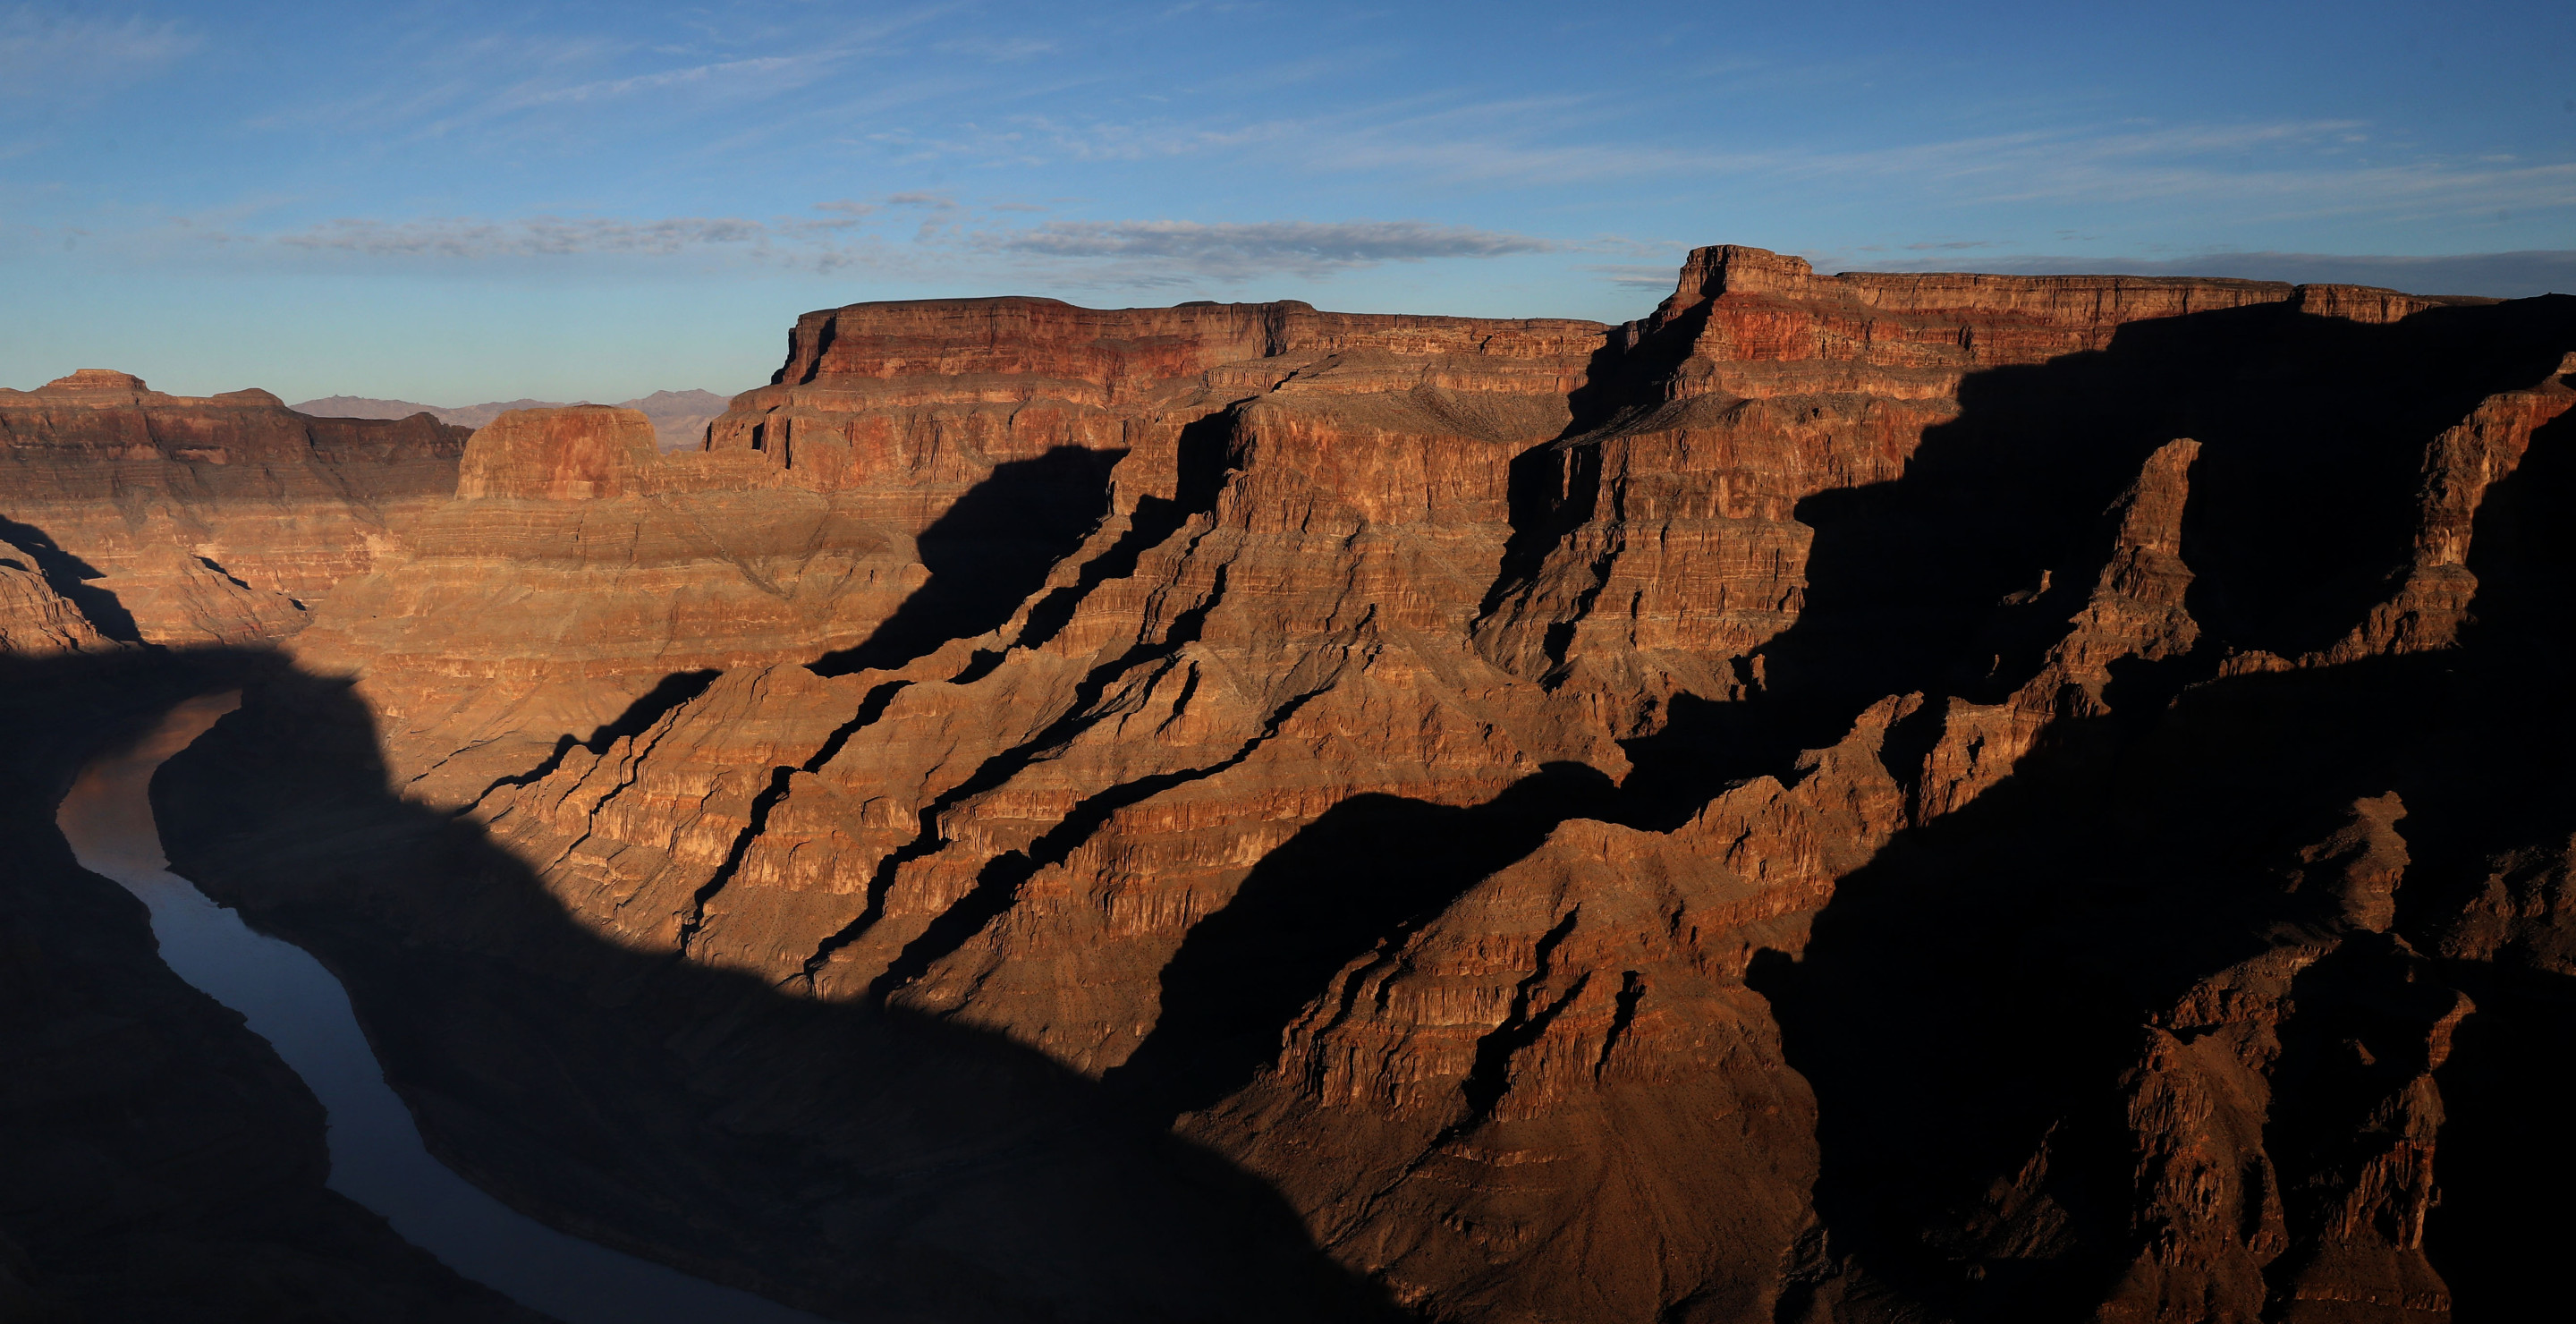 Hiking Trip To The Grand Canyon Leaves One Hiker Dead, Investigation Underway